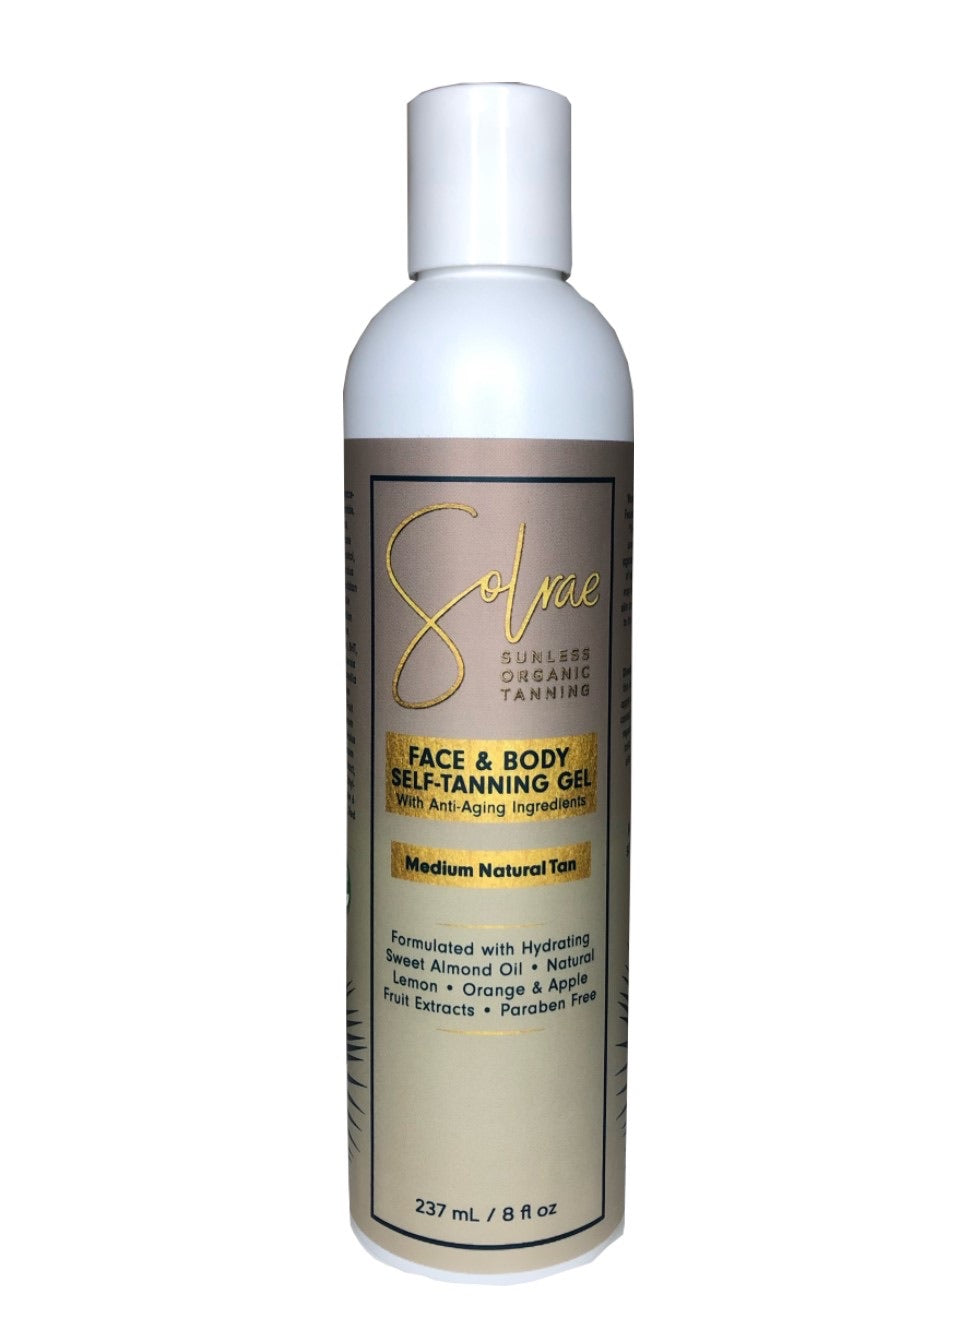 Solrae Tanning Gel for Face and Body